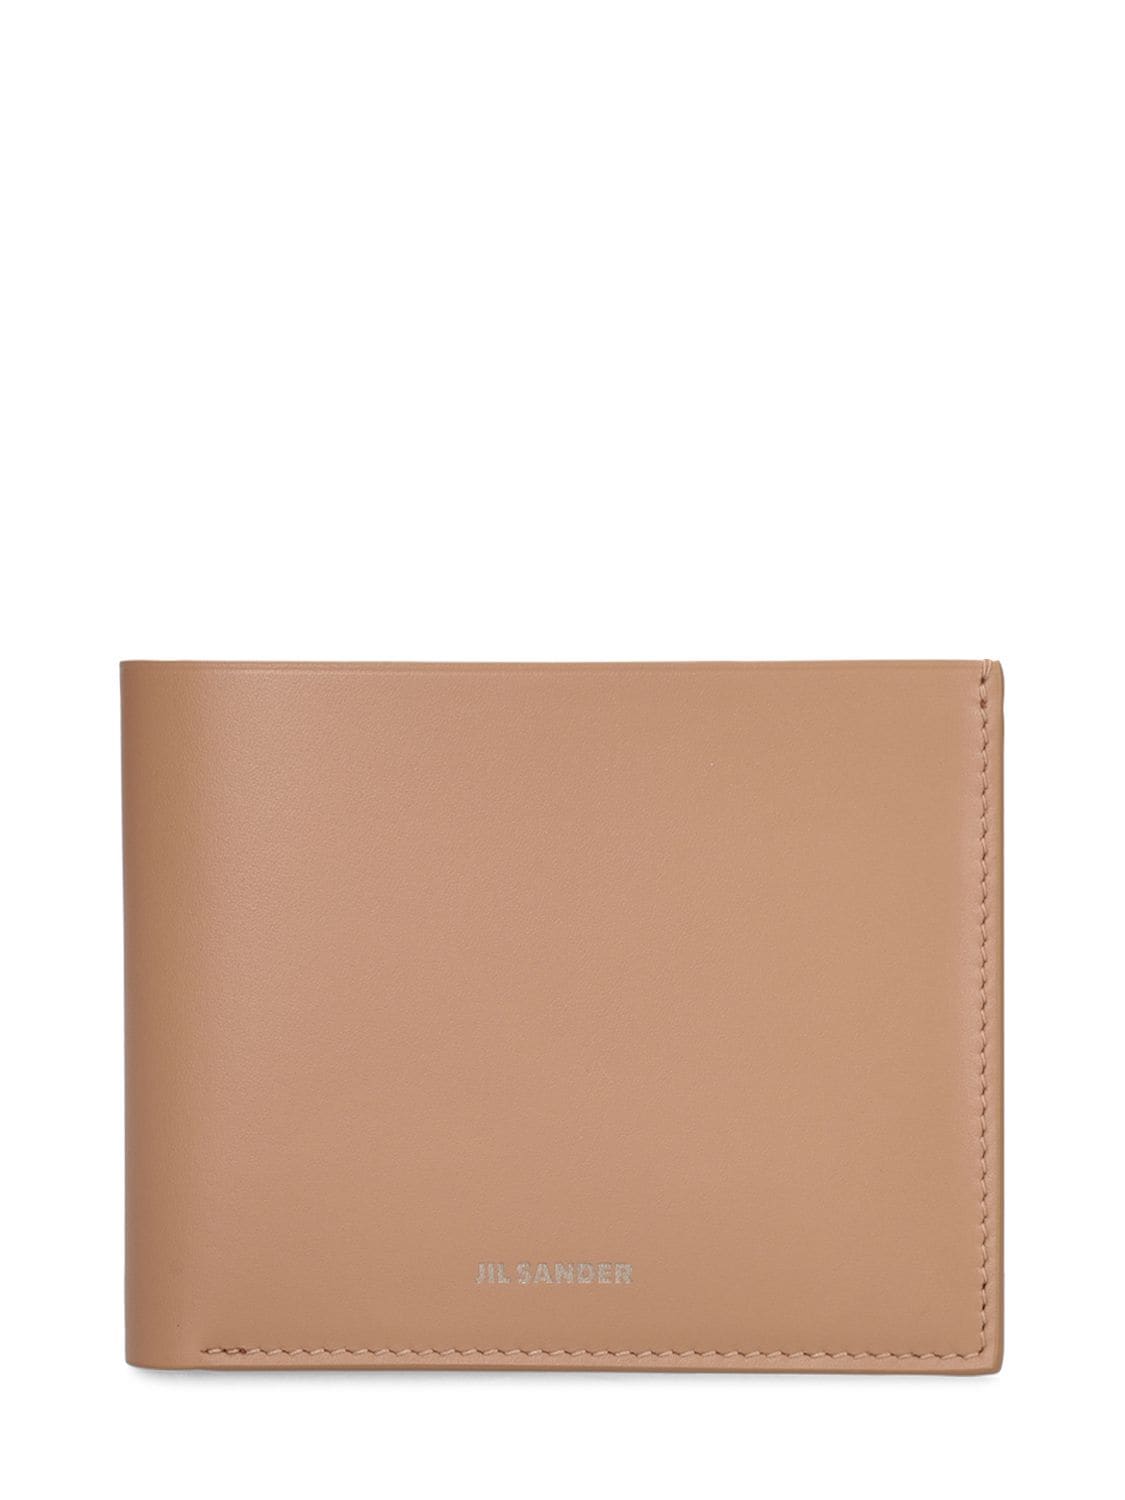 Image of Leather Wallet